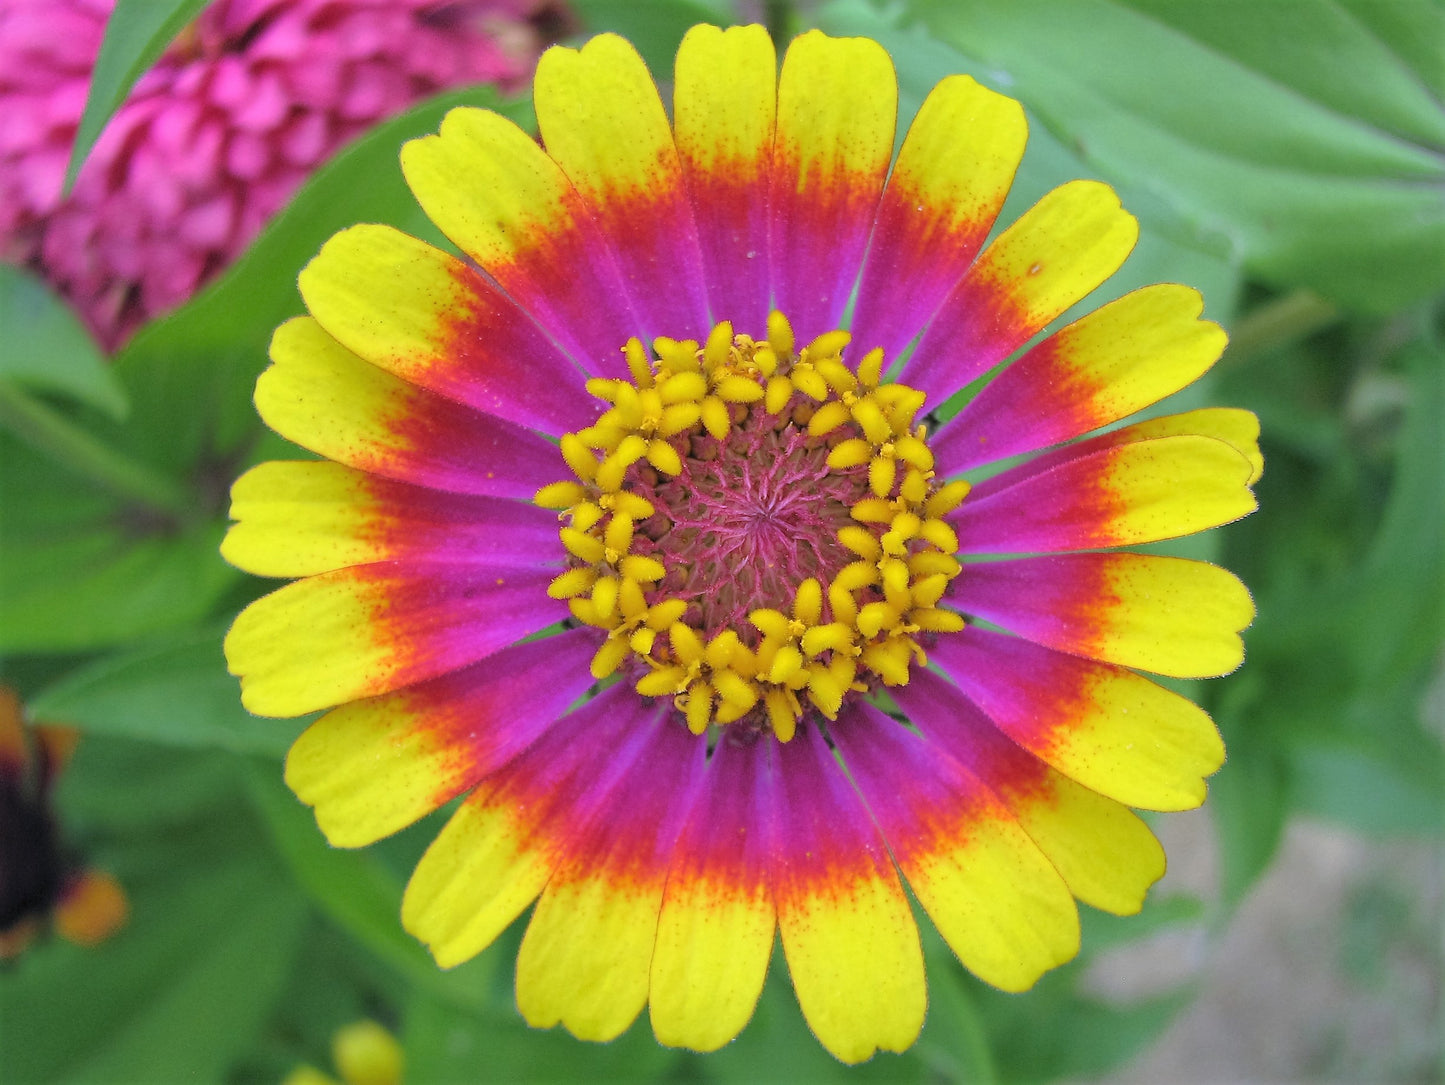 50 CAROUSEL MIX ZINNIA Elegans Carrousel Whirligig Mixed Colors Bicolor Flower Seeds